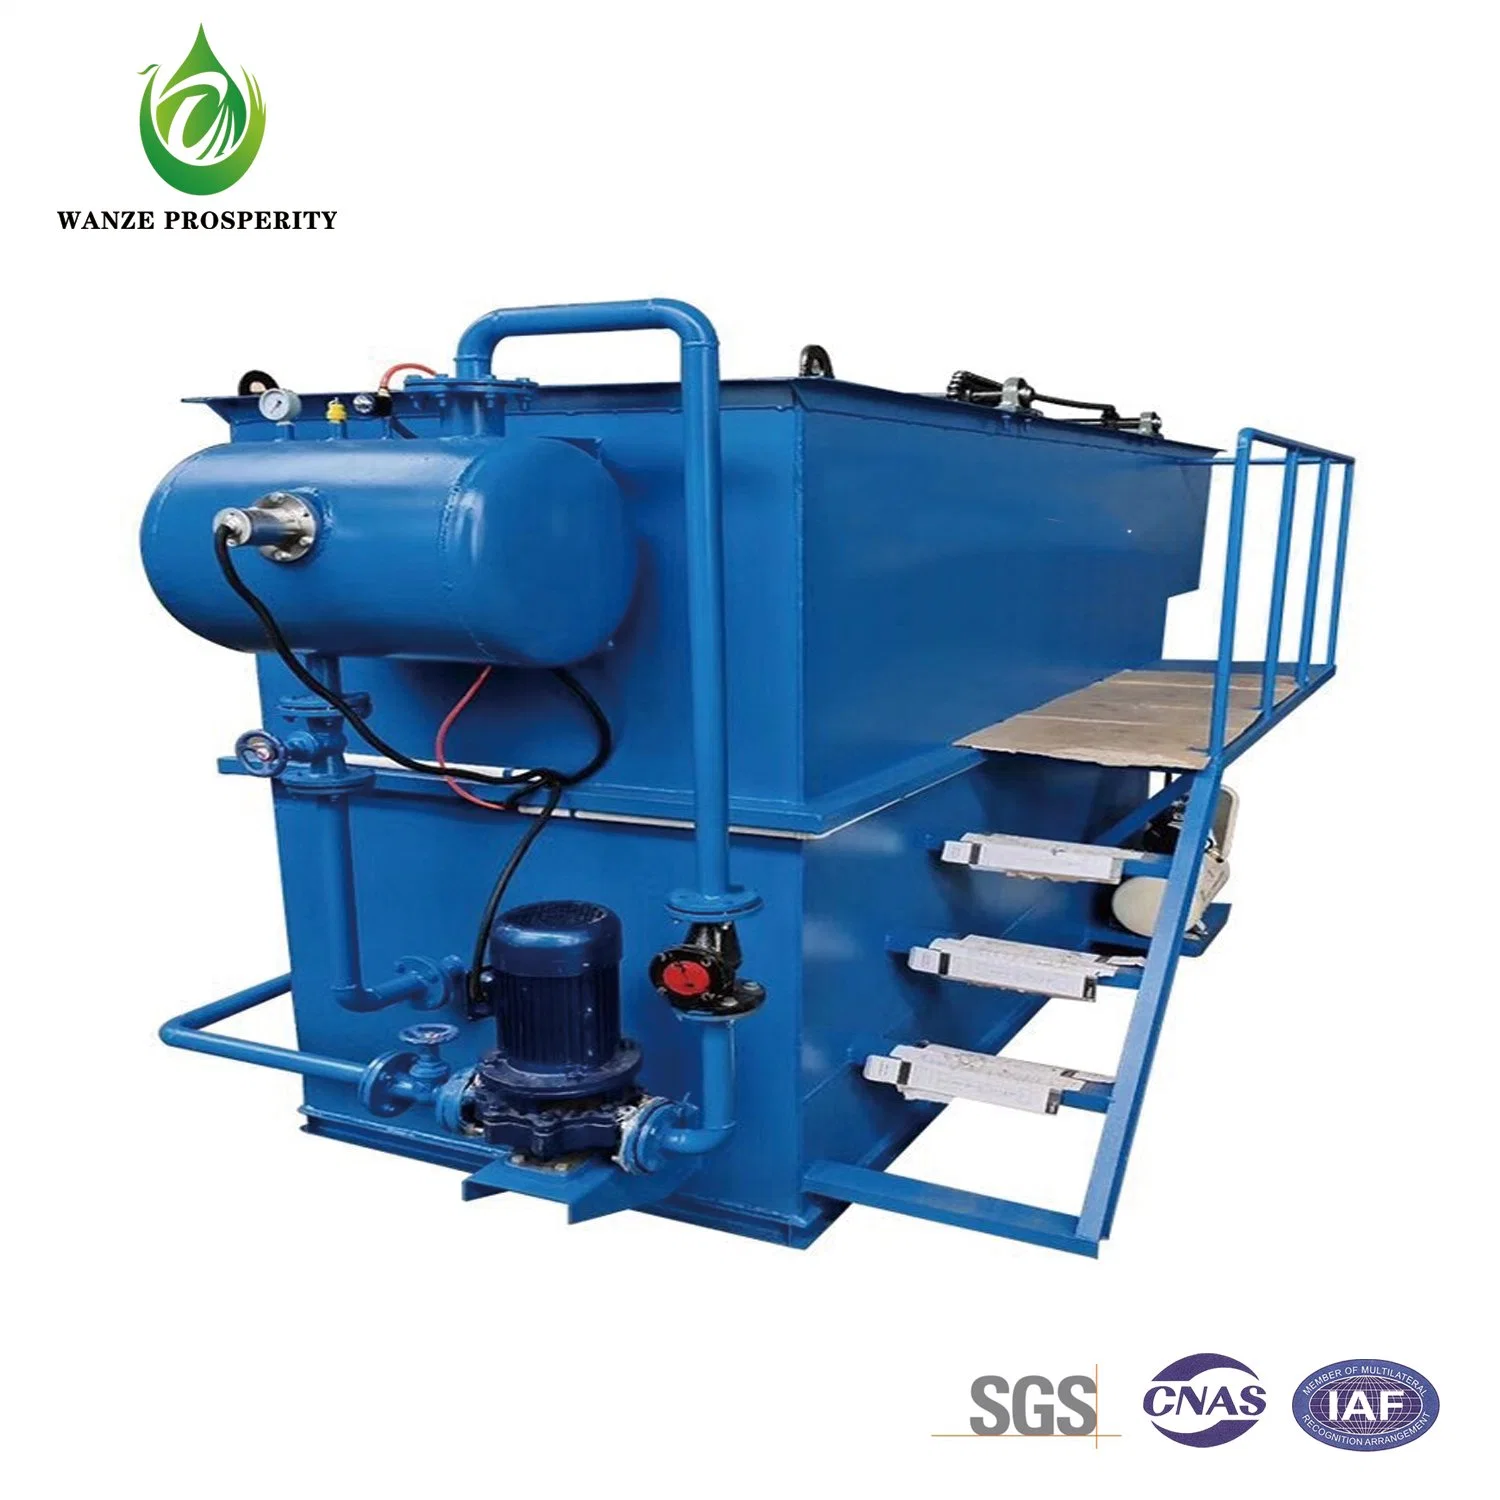 Sedimentation, Filtration, and Air Flotation Device for Wastewater From Washing Plants